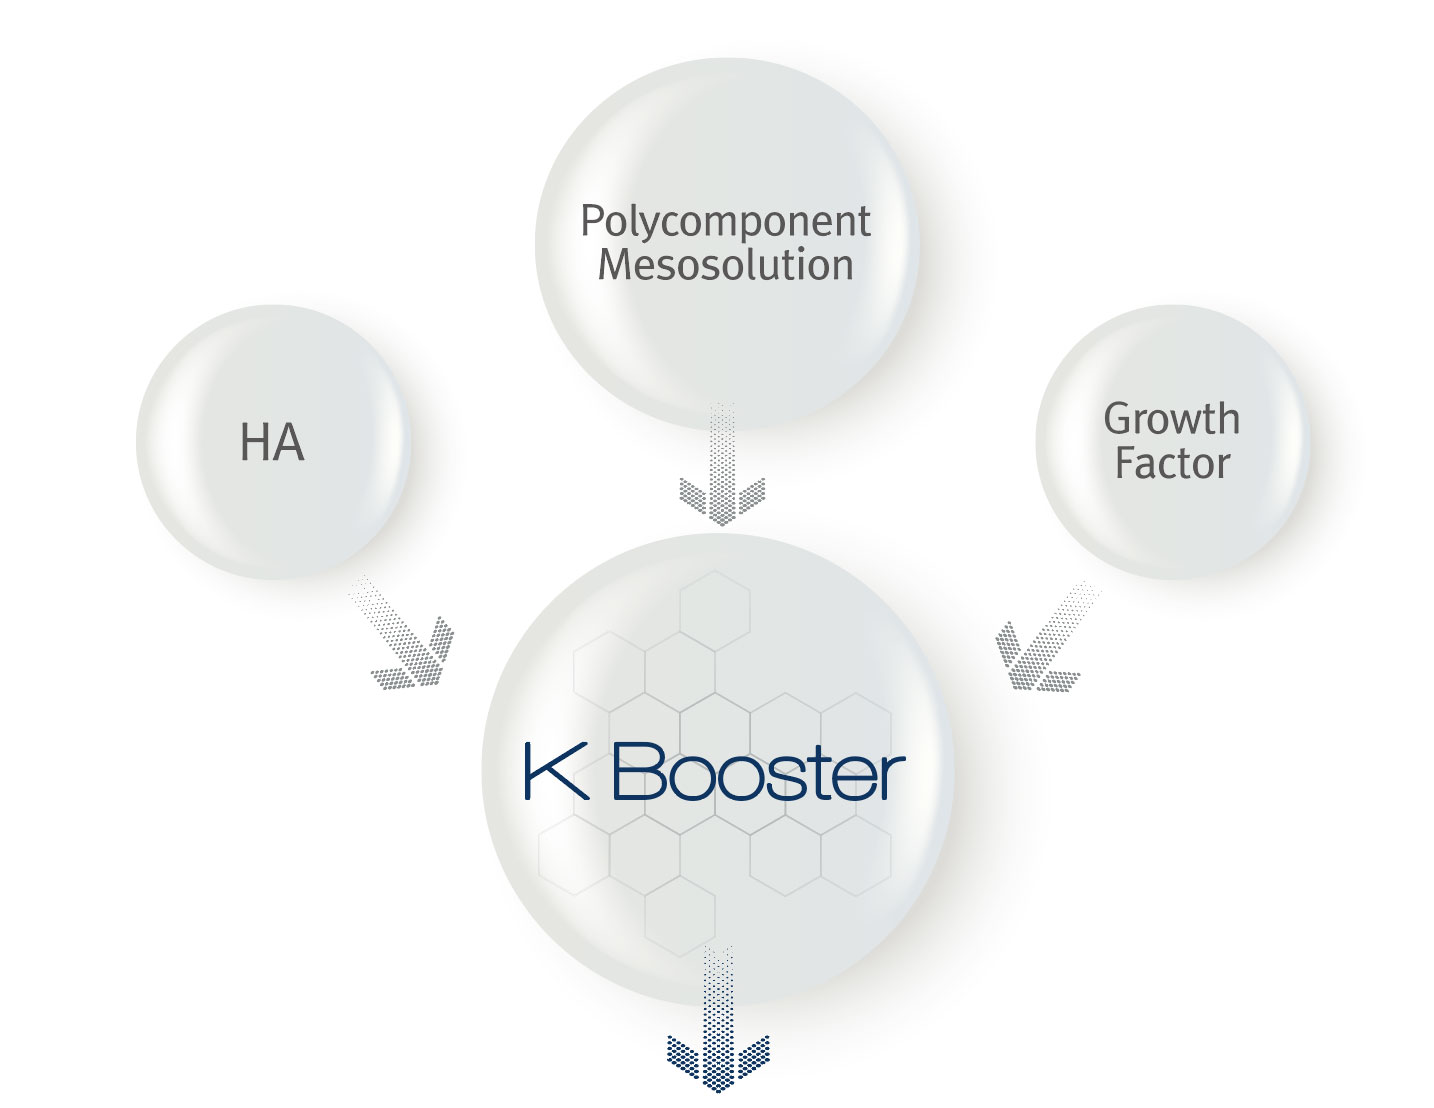 Polycomponent Mesosolution + HA + Growth Factor = K Booster